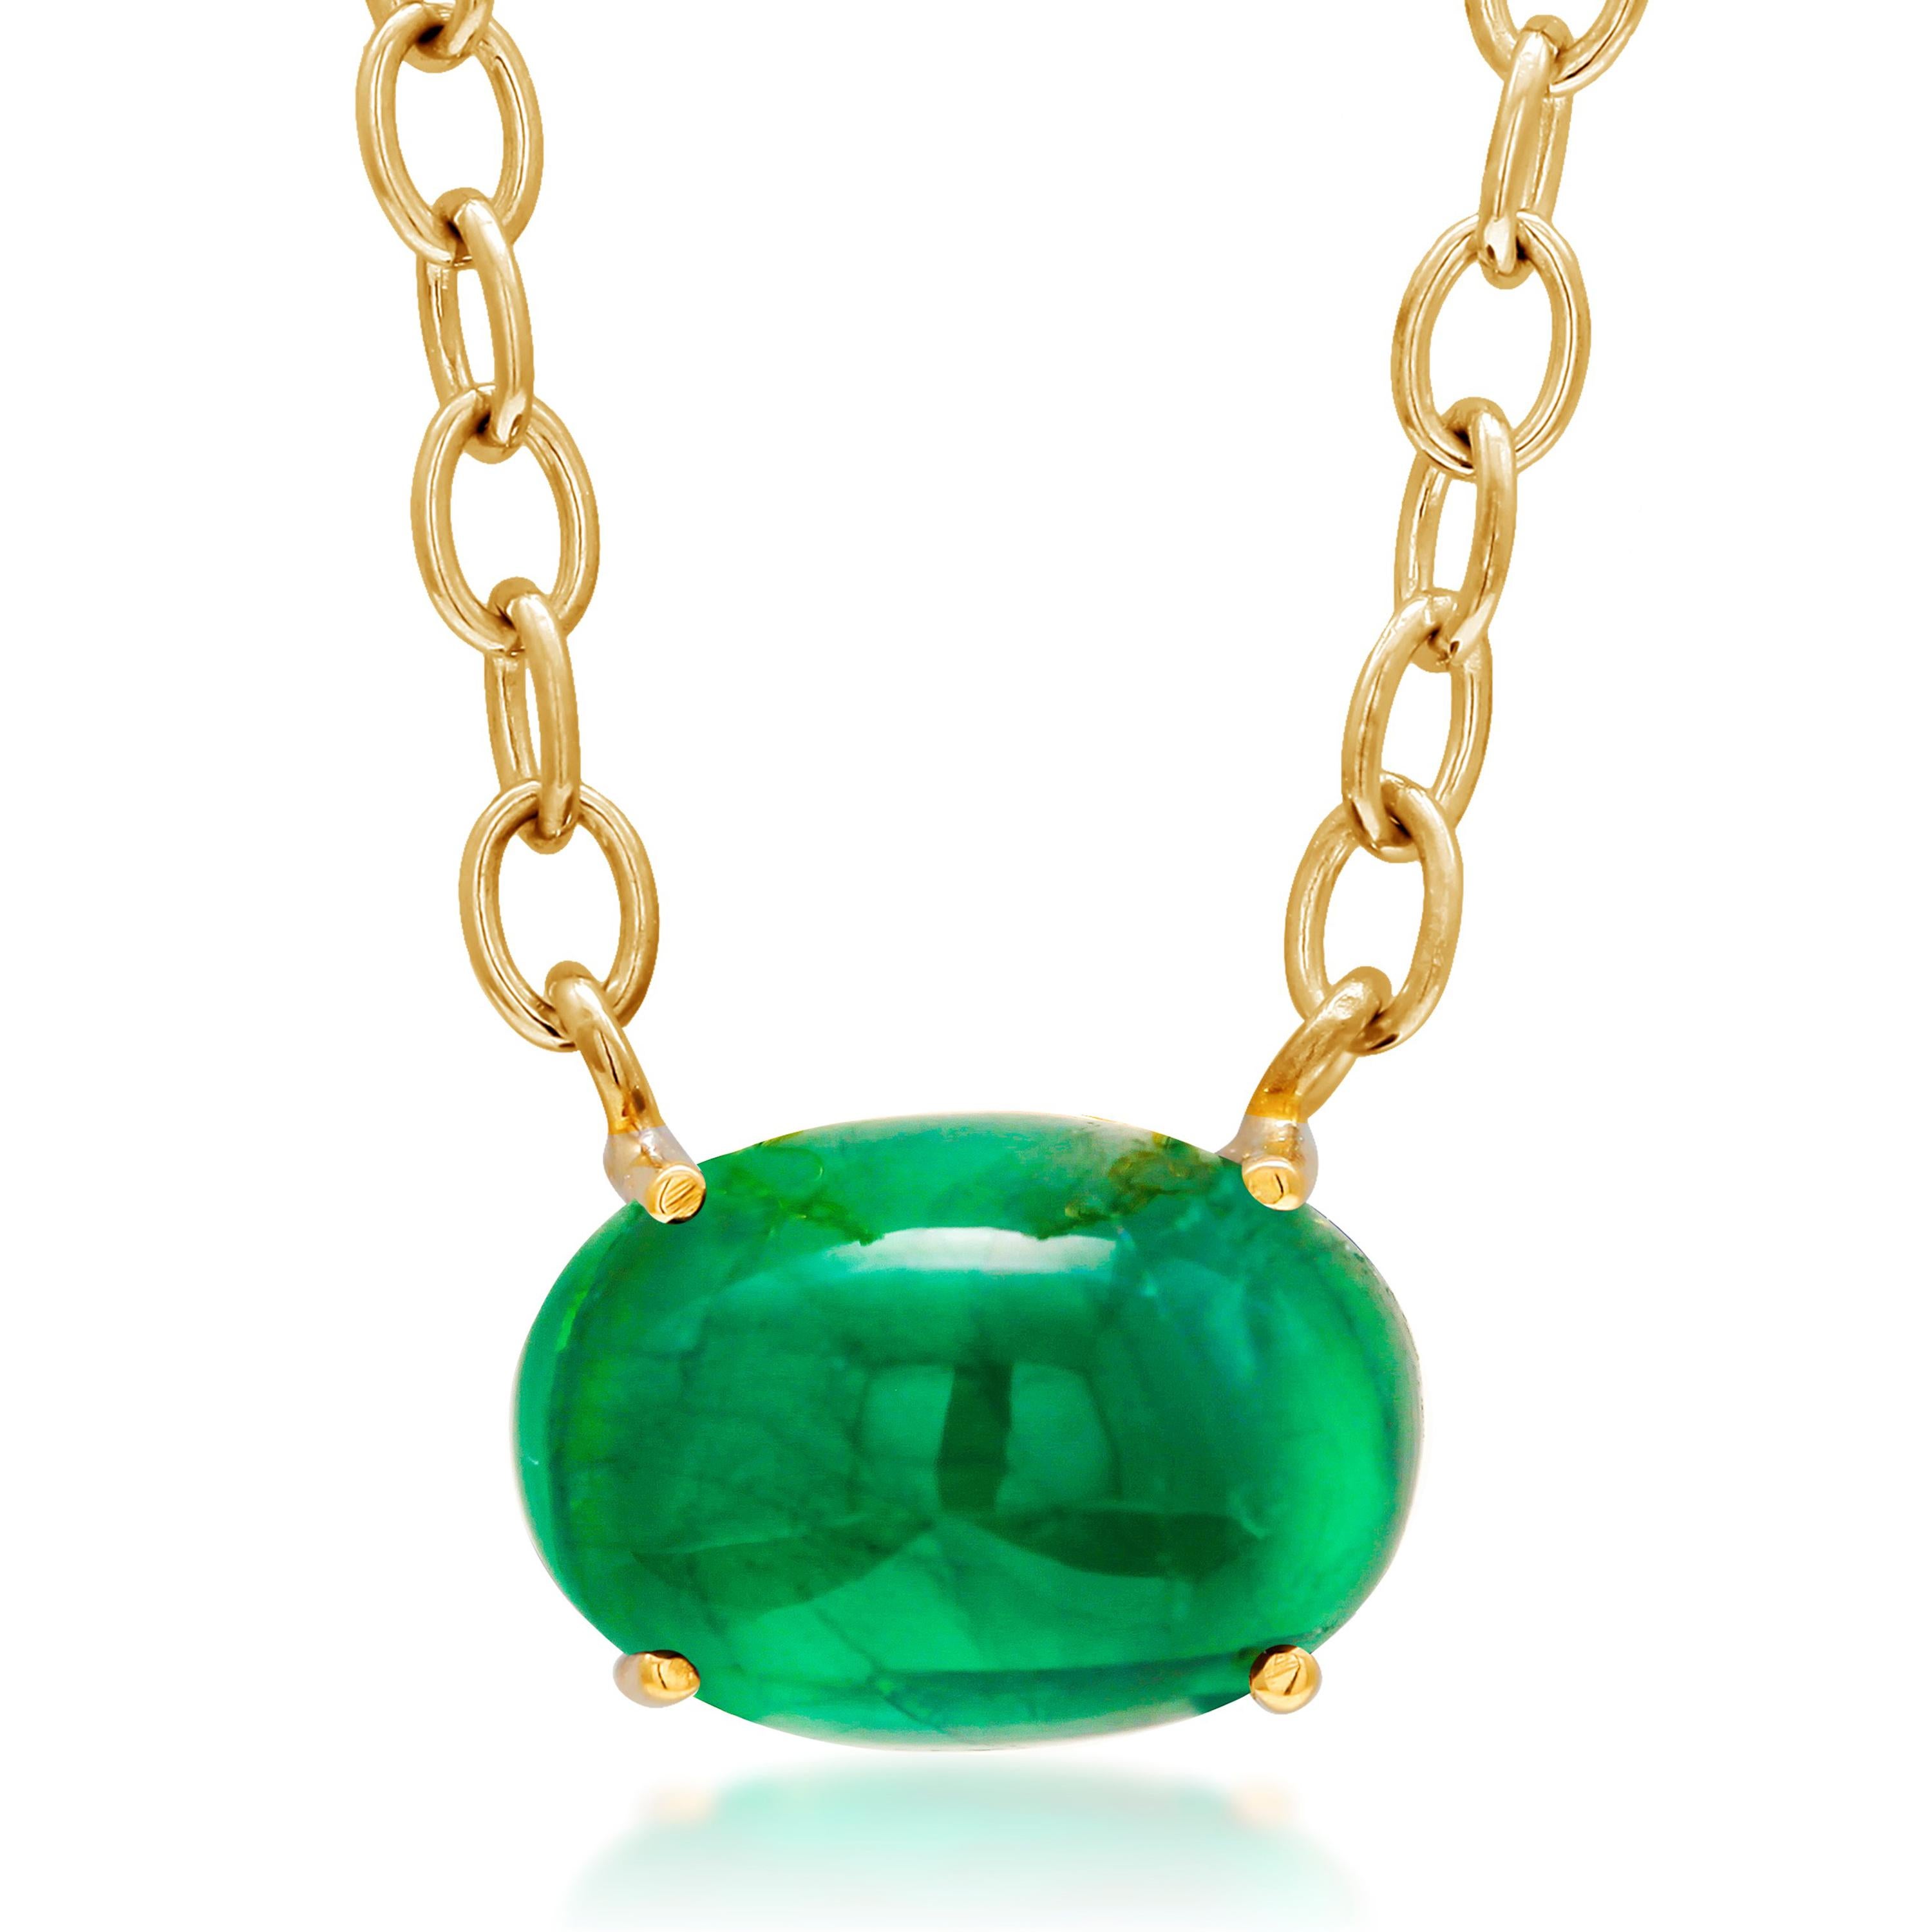 18 karats yellow gold necklace pendant with Colombia cabochon emerald
Necklace measuring 17 inch 
Colombia cabochon emerald weighing 6.53 carats
Cable chain necklace with lobster spring lock
Cabochon emerald measuring 13x11 millimeter
New